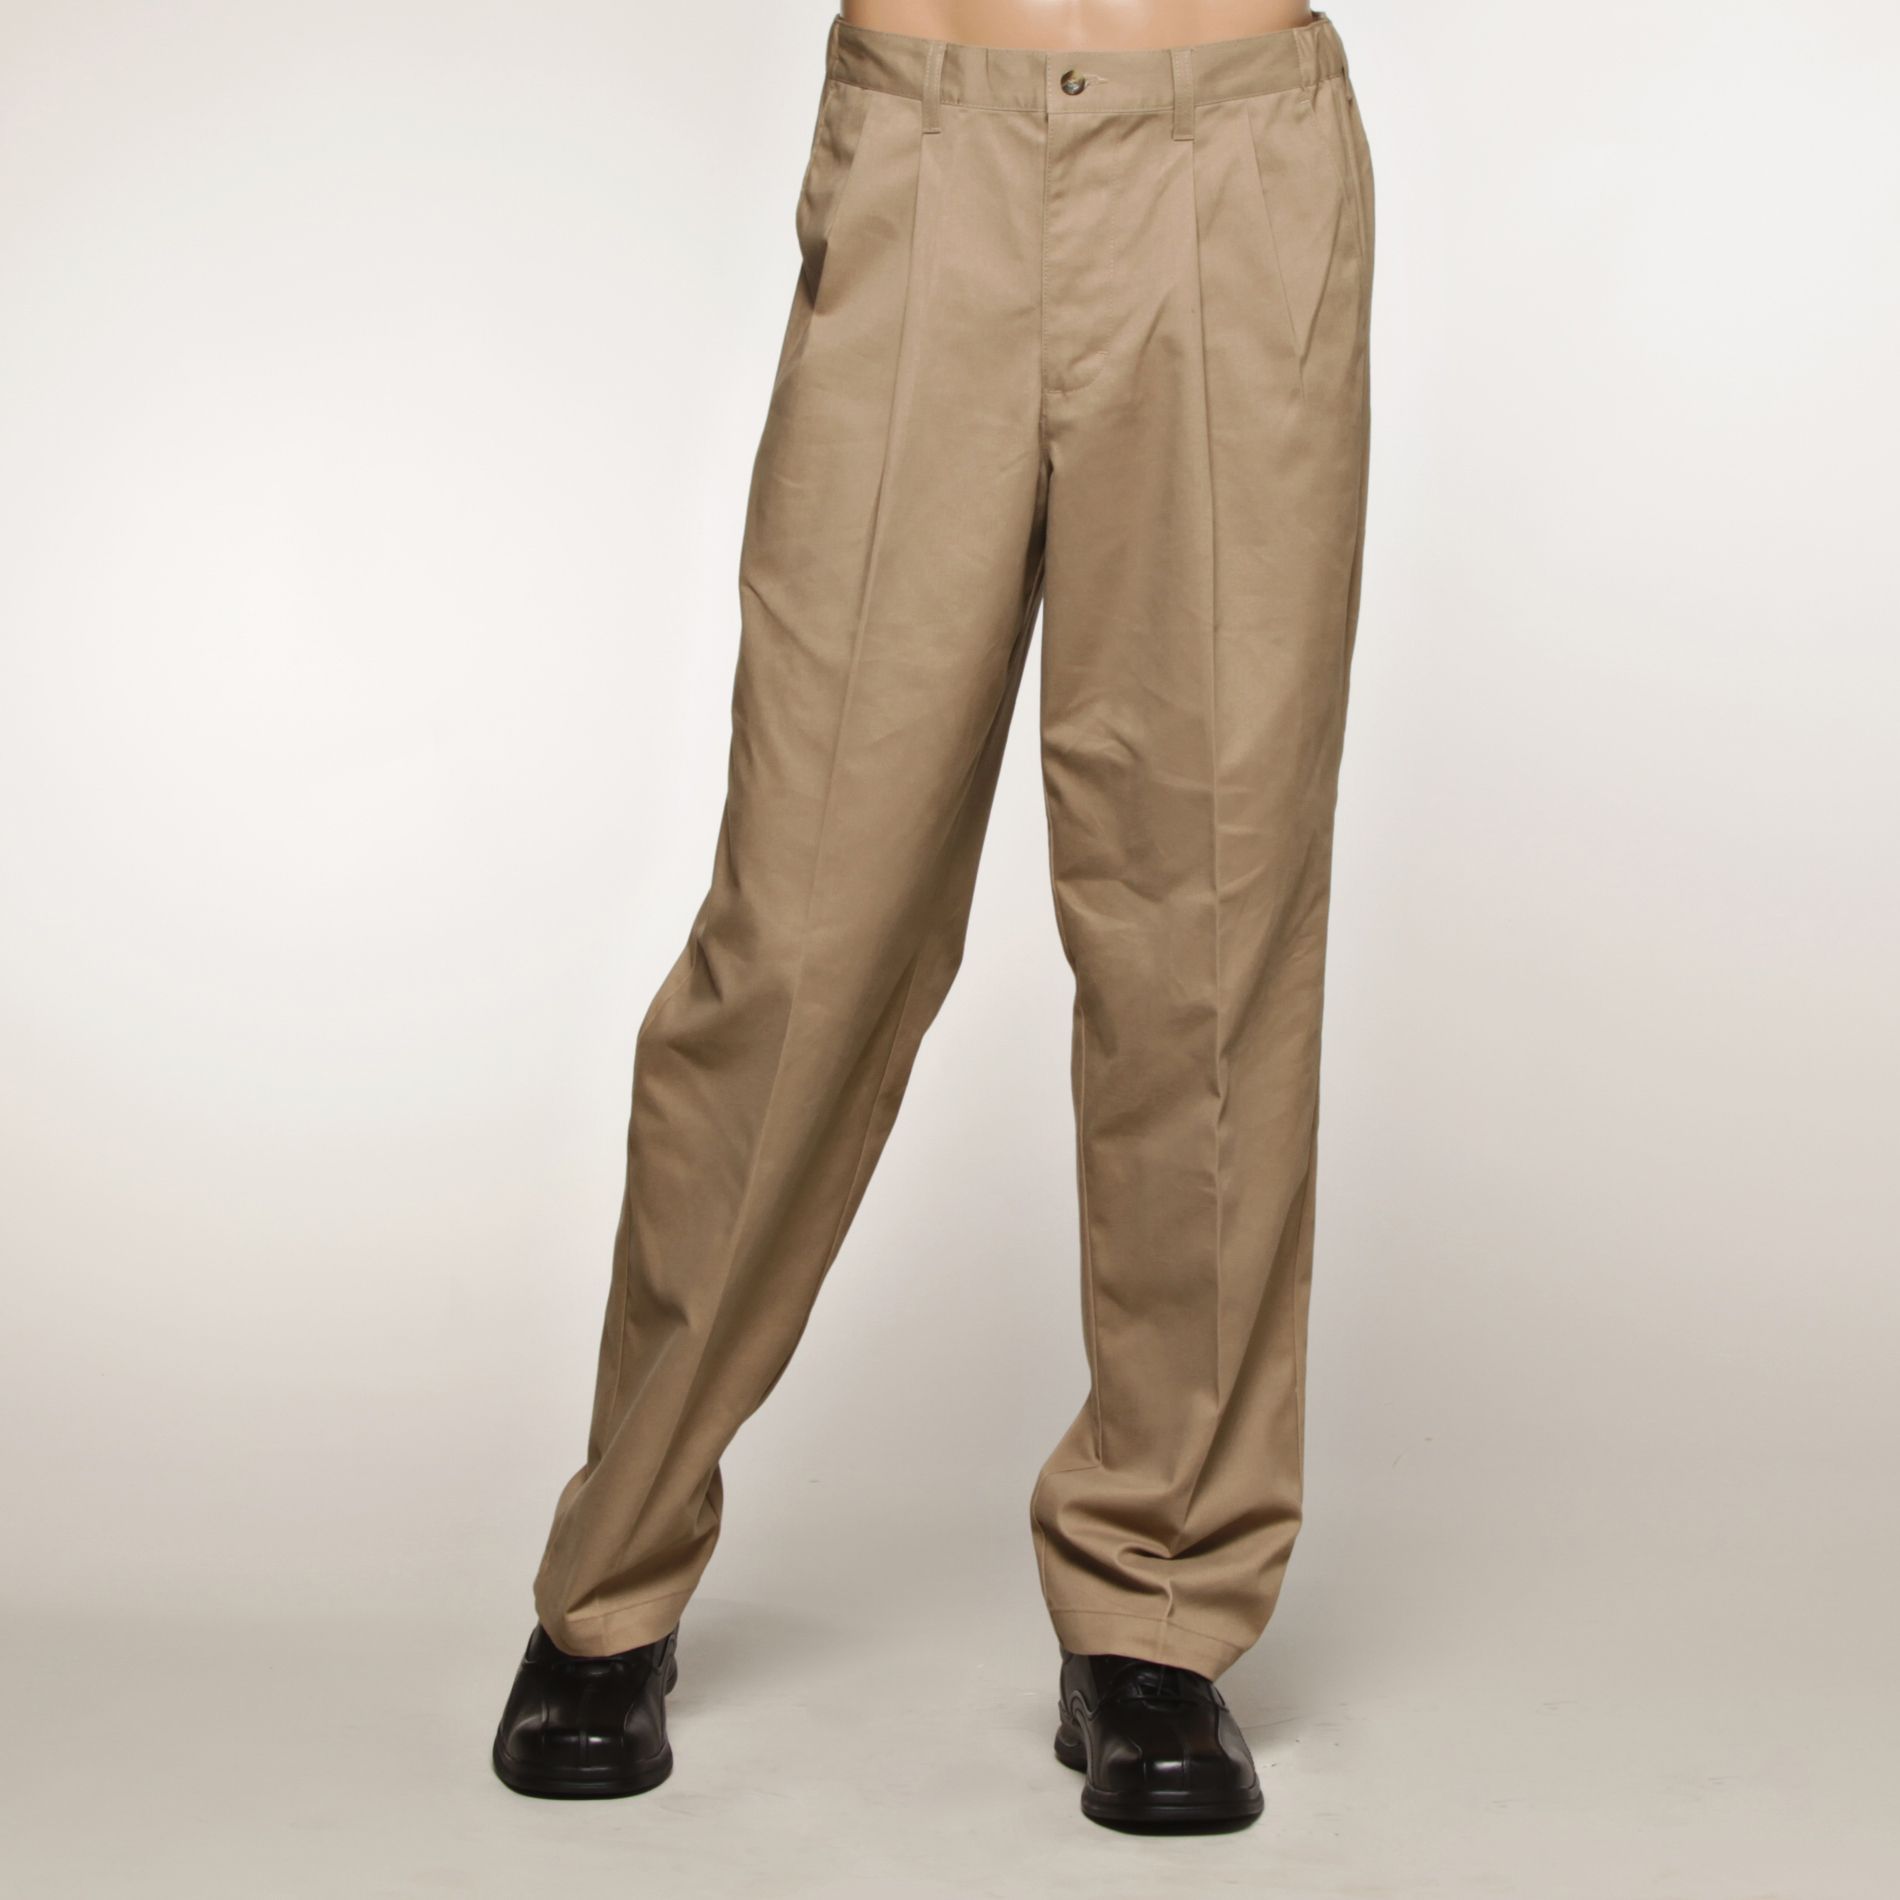 Basic Editions Men's Pleated Twill Pants